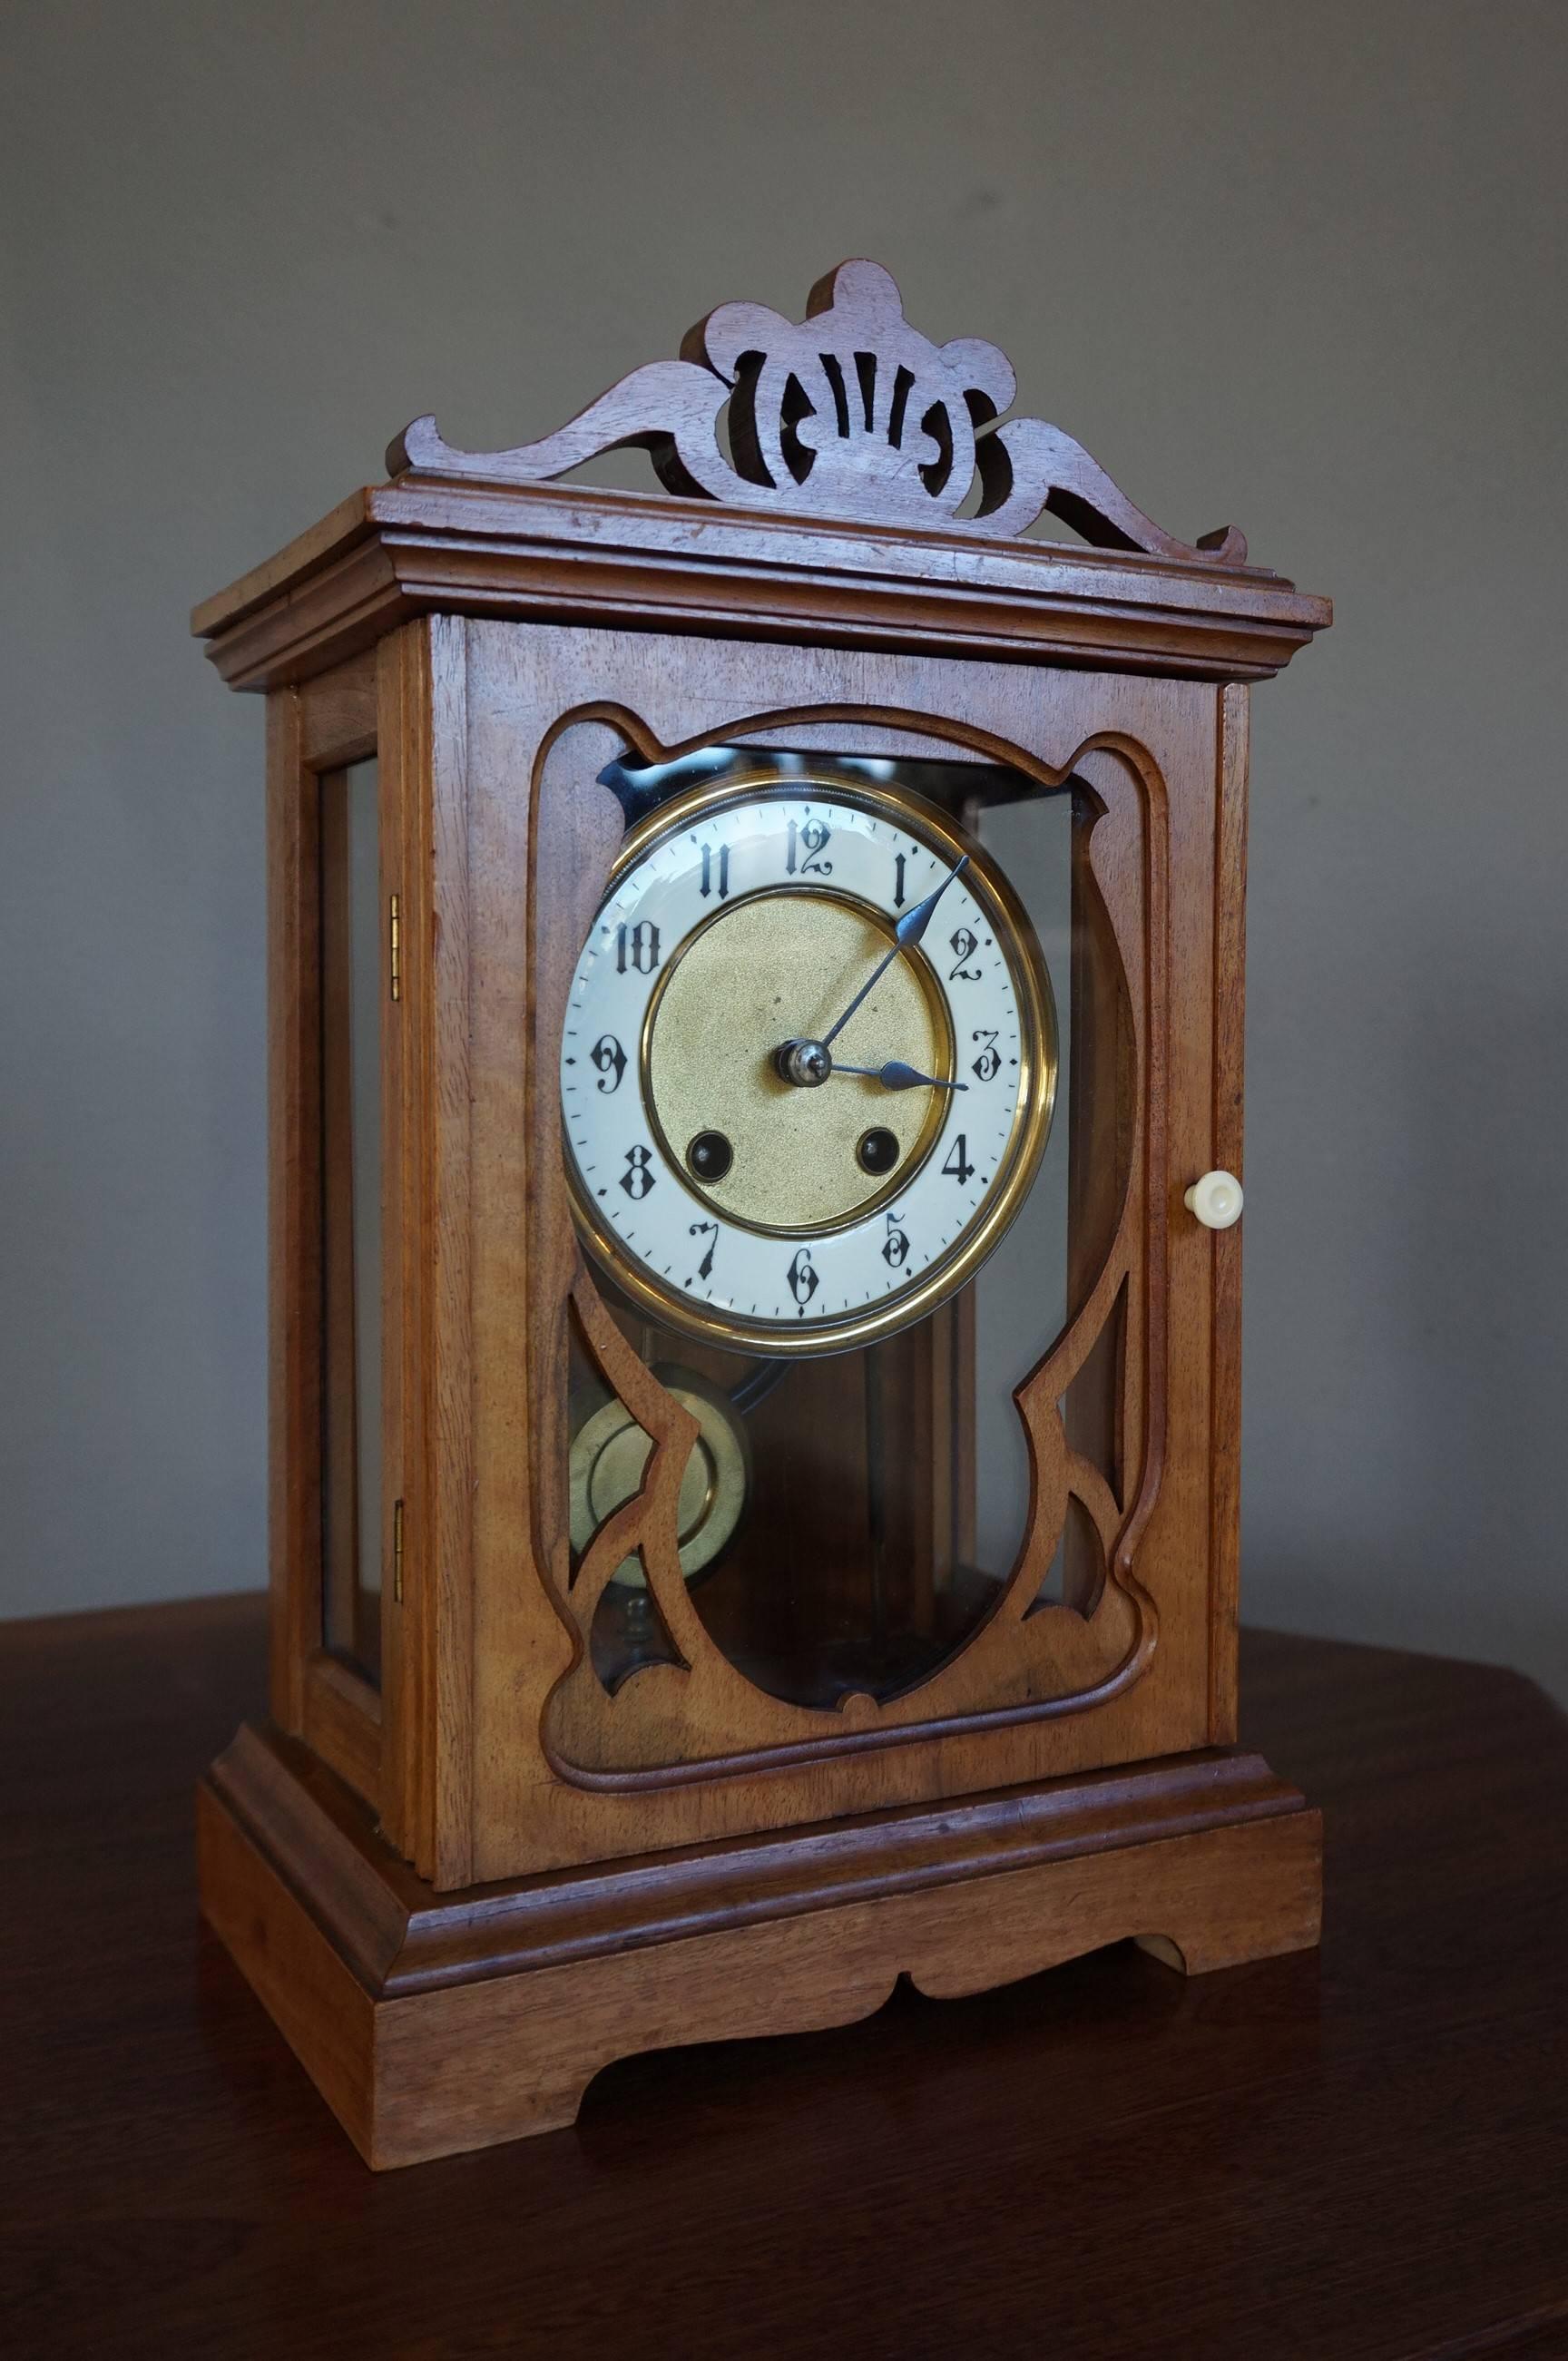 Practical size and beautiful shape Arts and Crafts mantel clock.

Because of the stylish design and the warm and natural patina of the fruitwood, this handcrafted clock from the early 1900's is a real beauty. The depth in the layers of wood that are